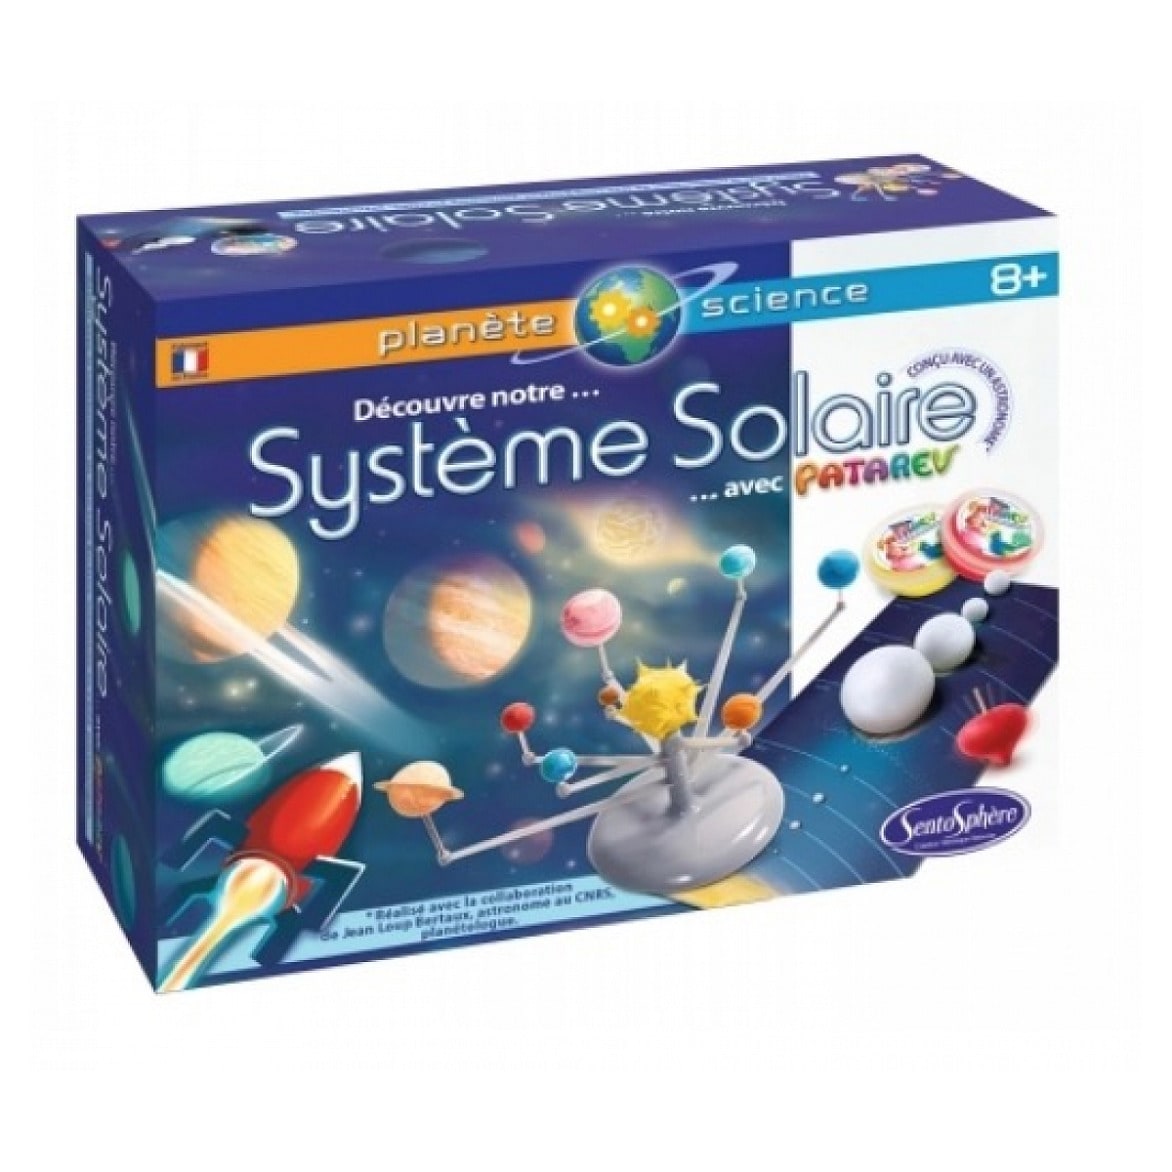 Le systeme solaire kit experience